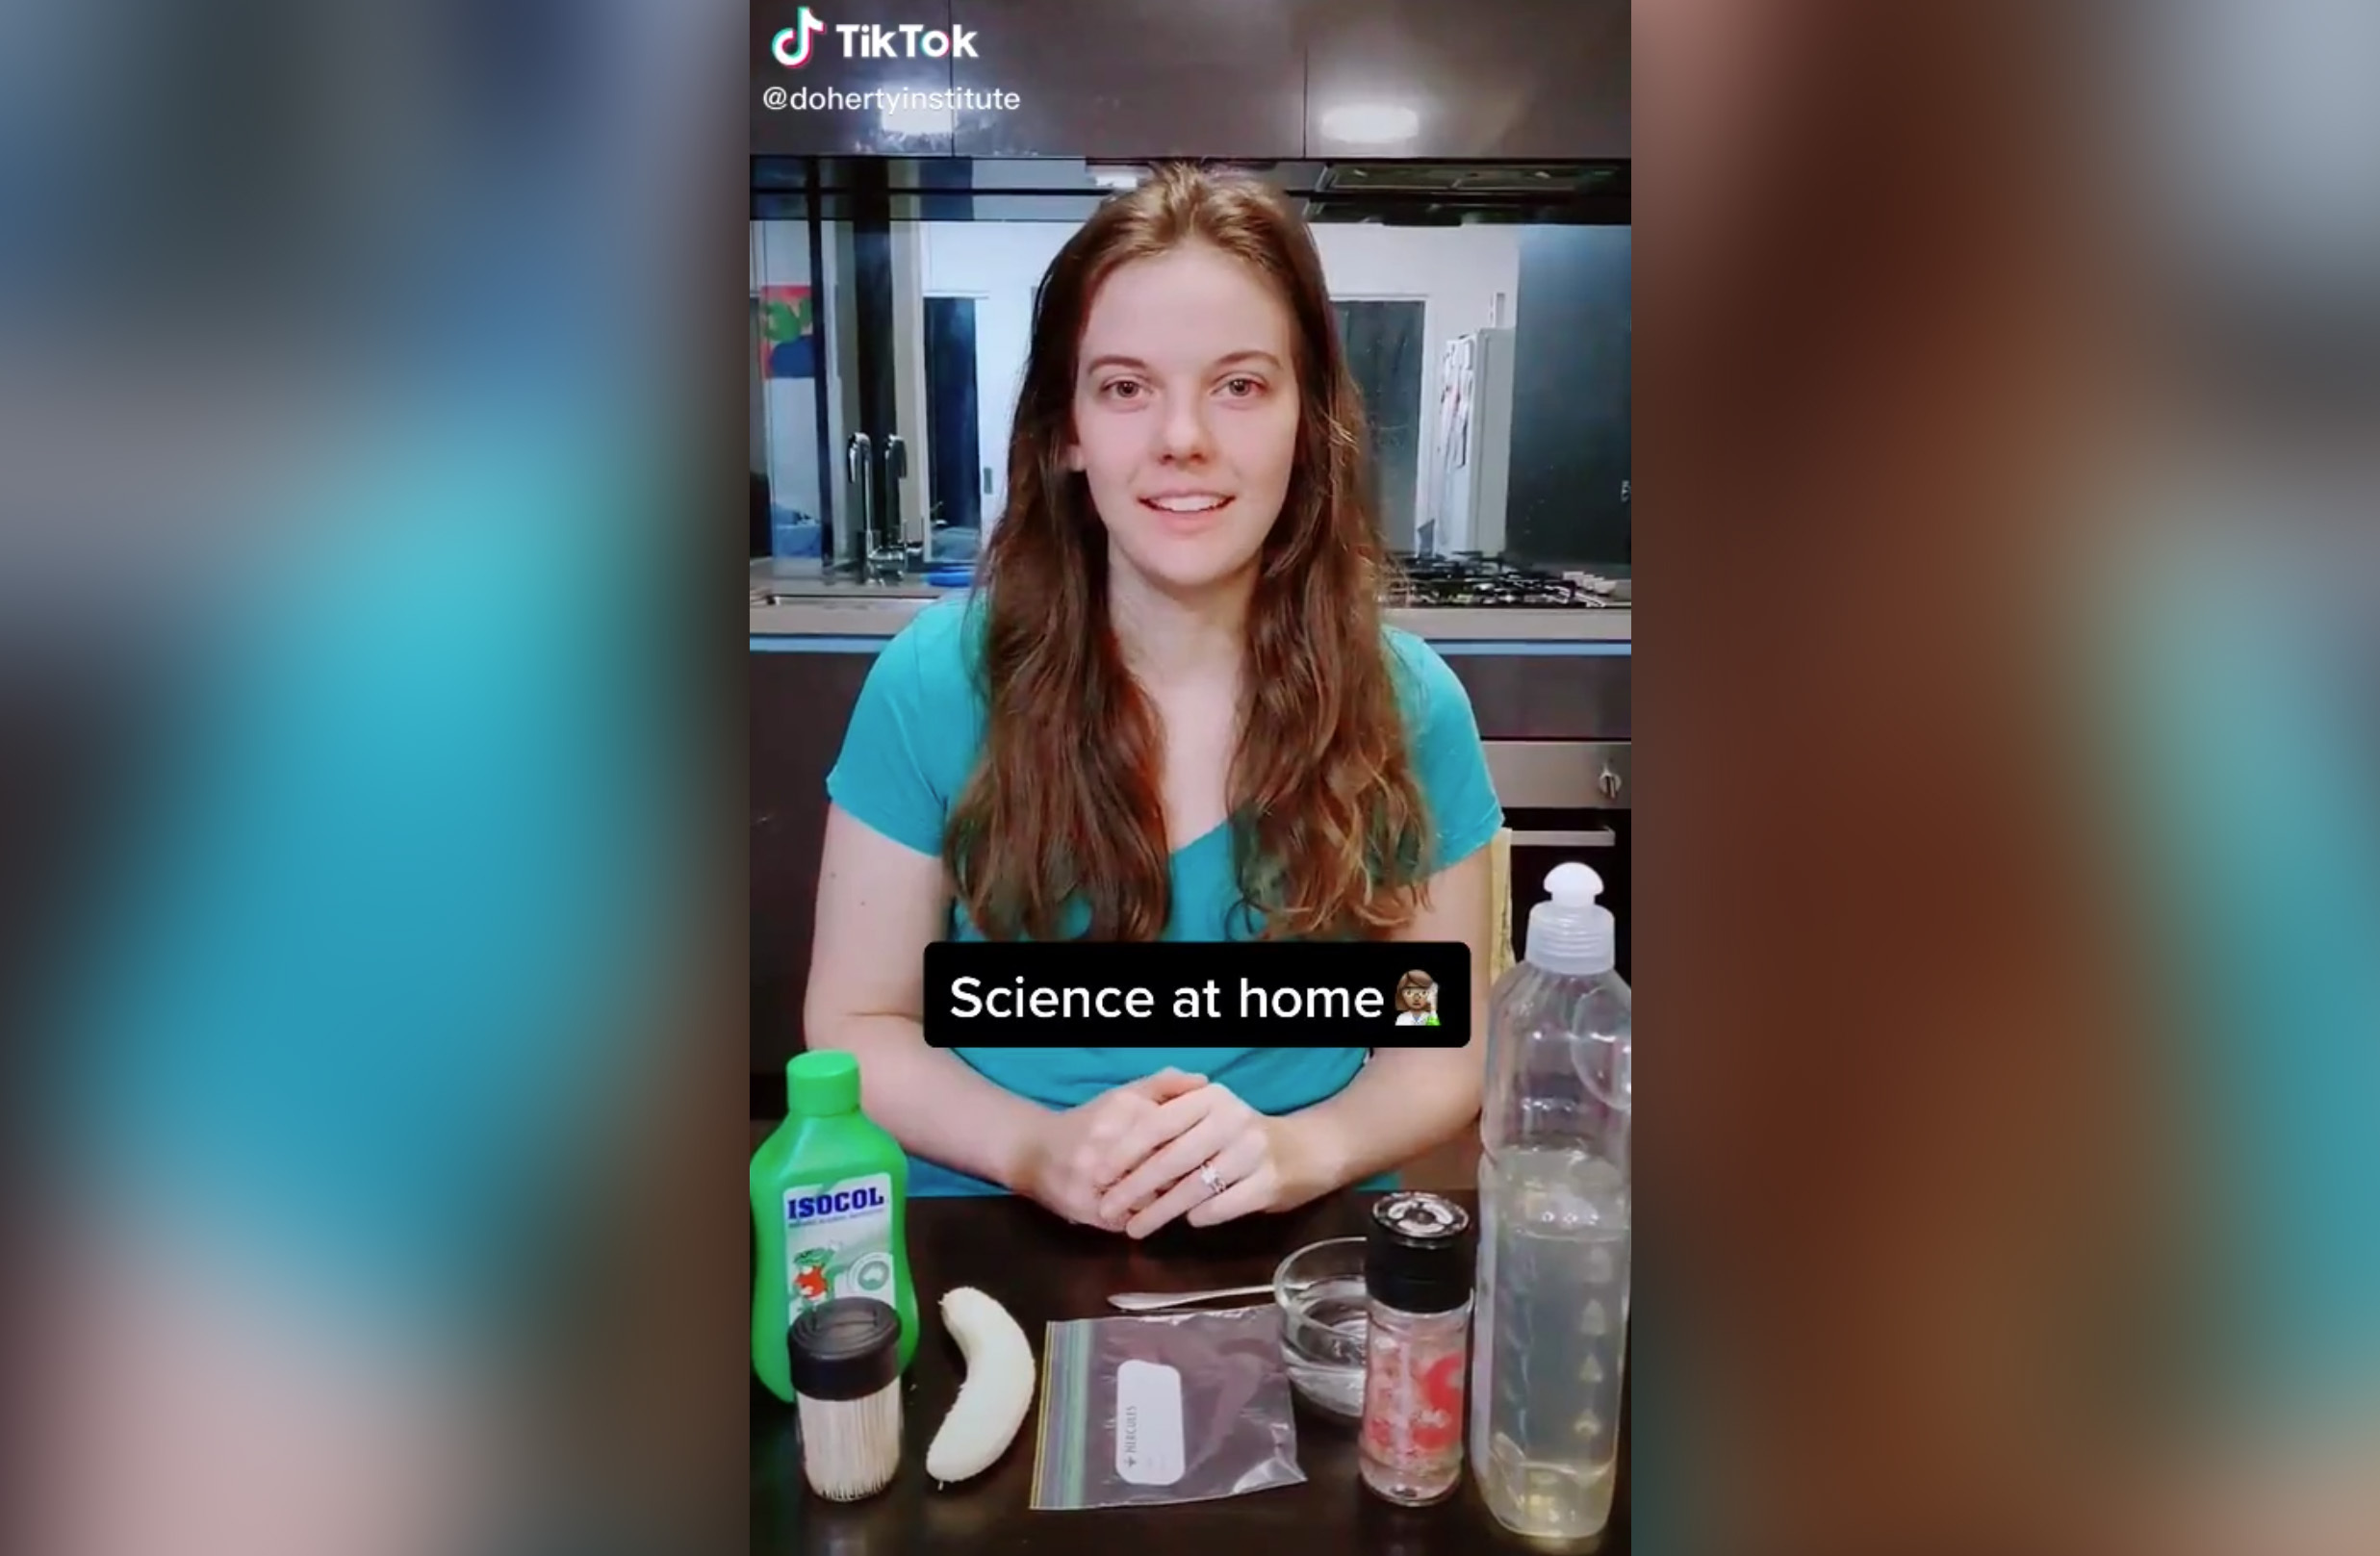 PhD Student, Jennifer Habel from University of Melbourne Professor Katherine Kedzierska's laboratory, revealing on Tik Tok how to extract DNA from a banana.